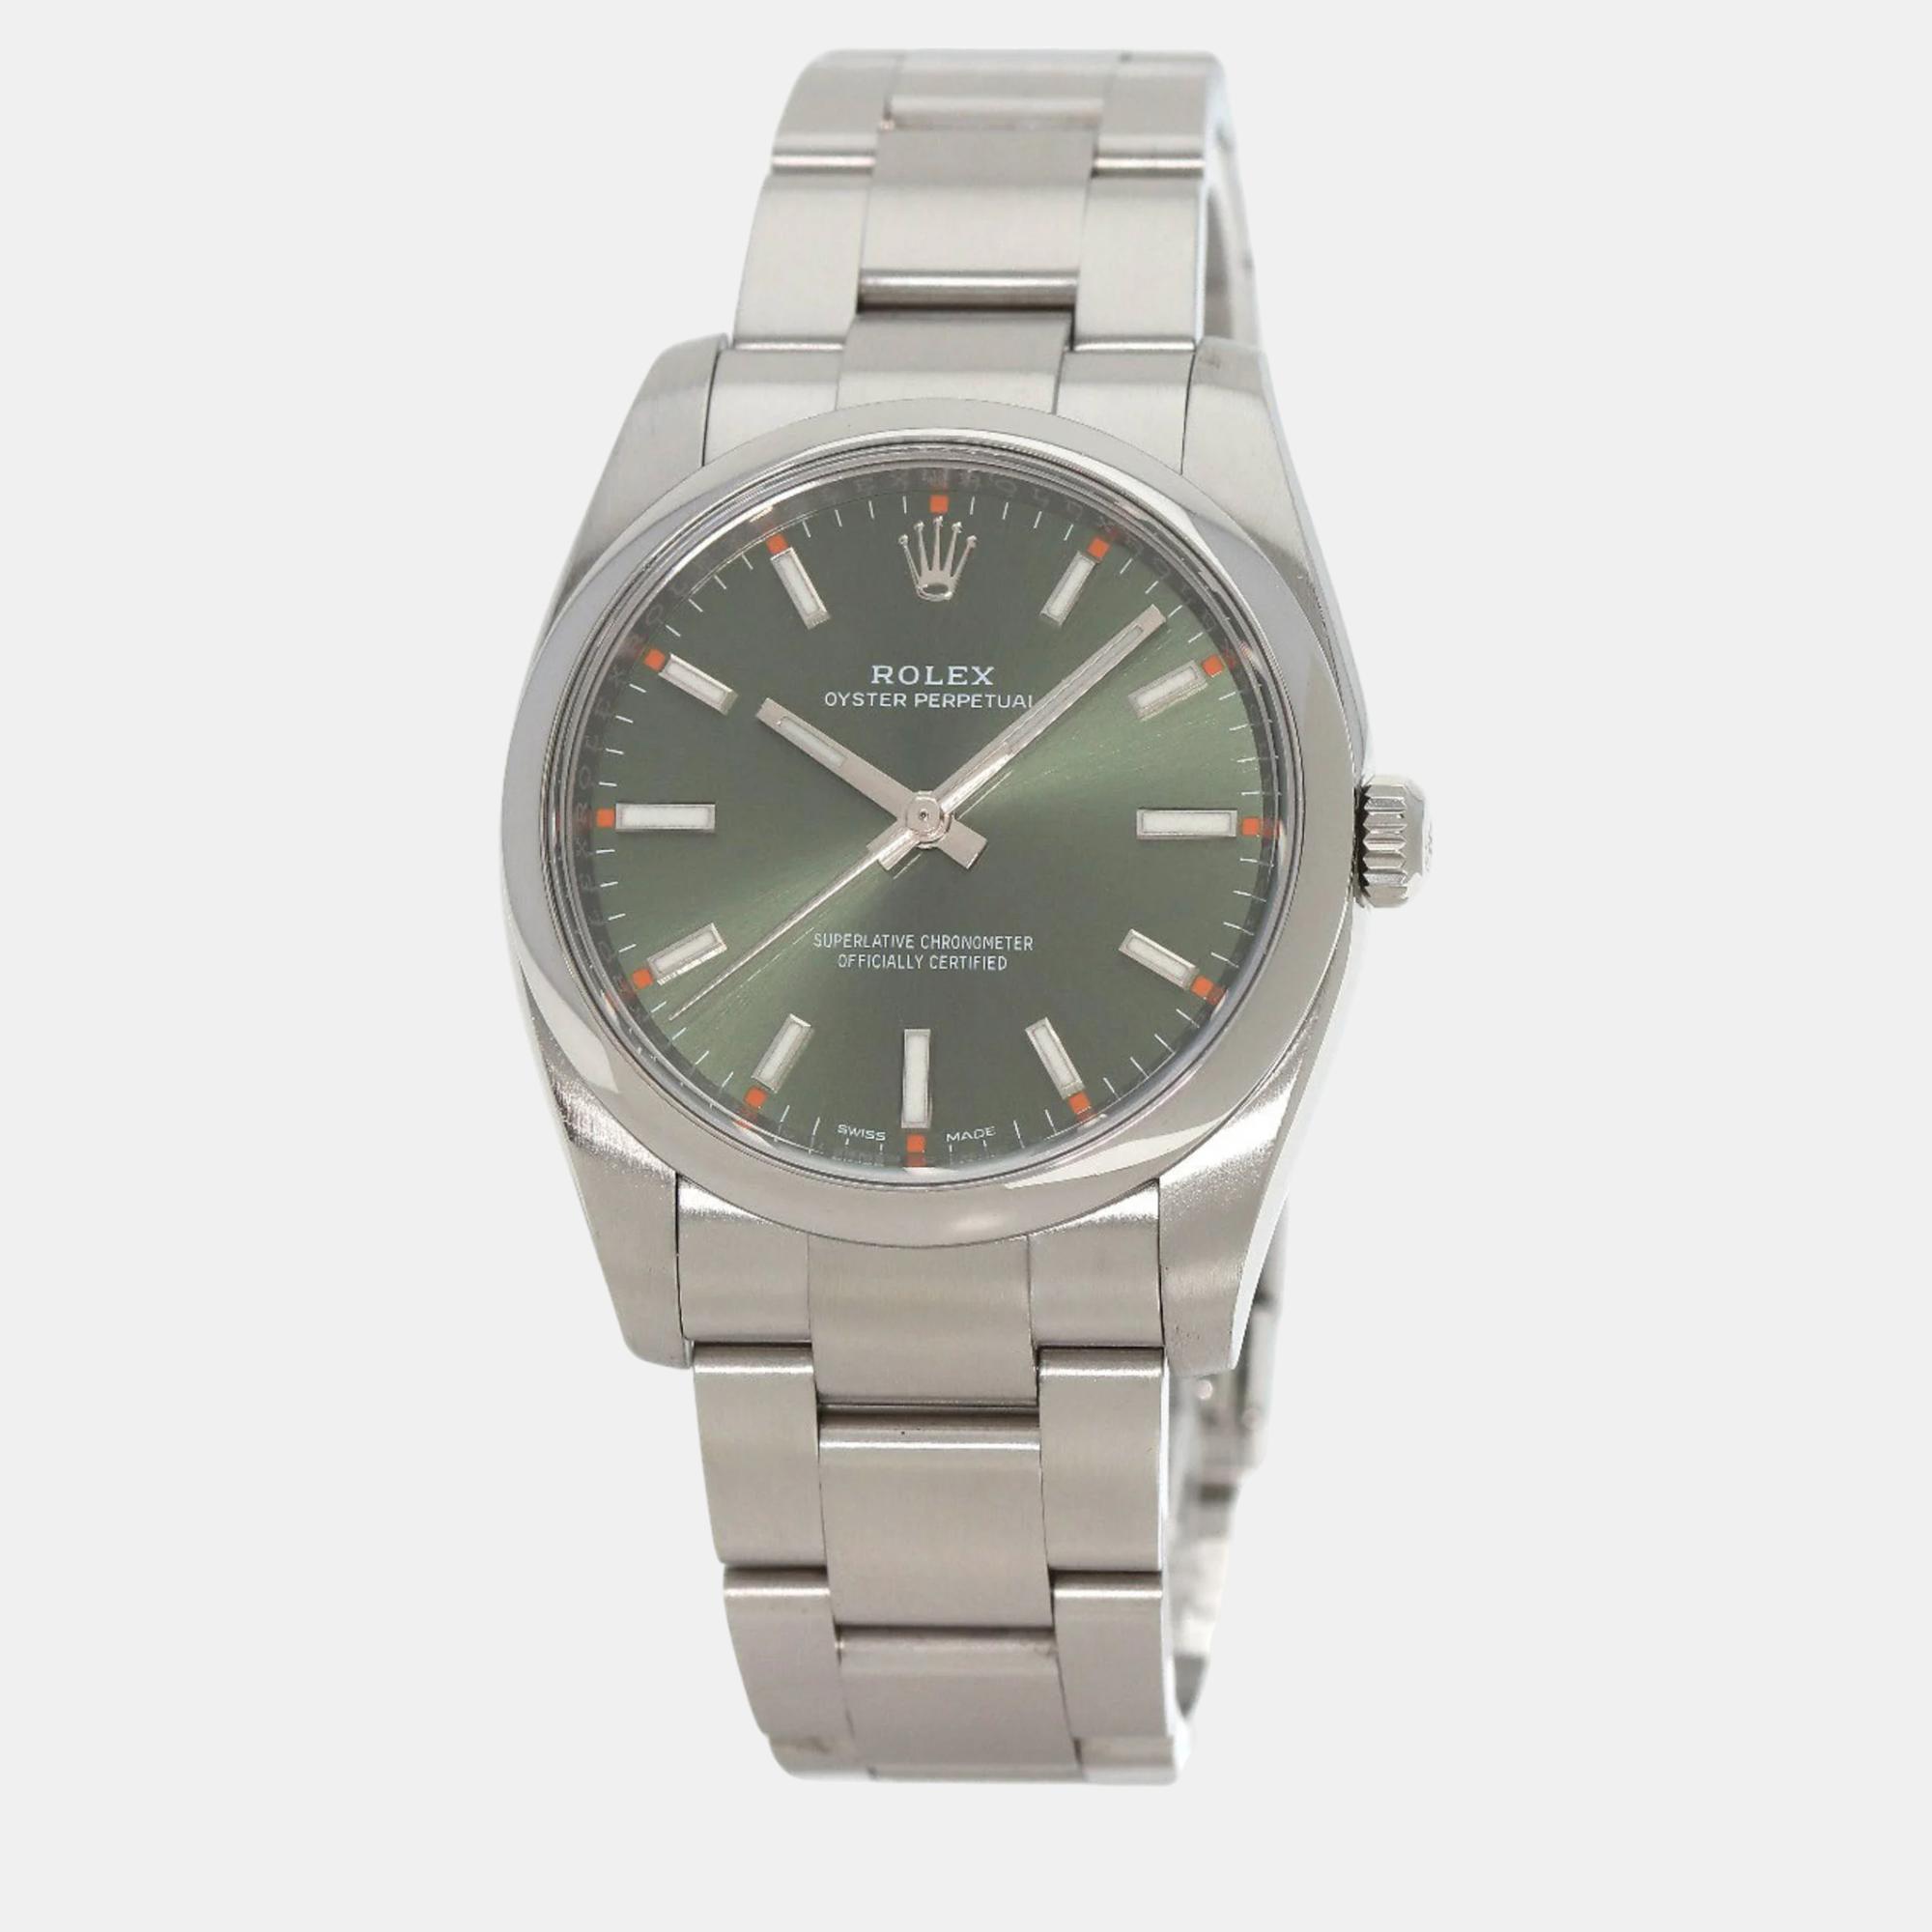 Rolex green stainless steel oyster perpetual 114200 automatic men's wristwatch 36 mm